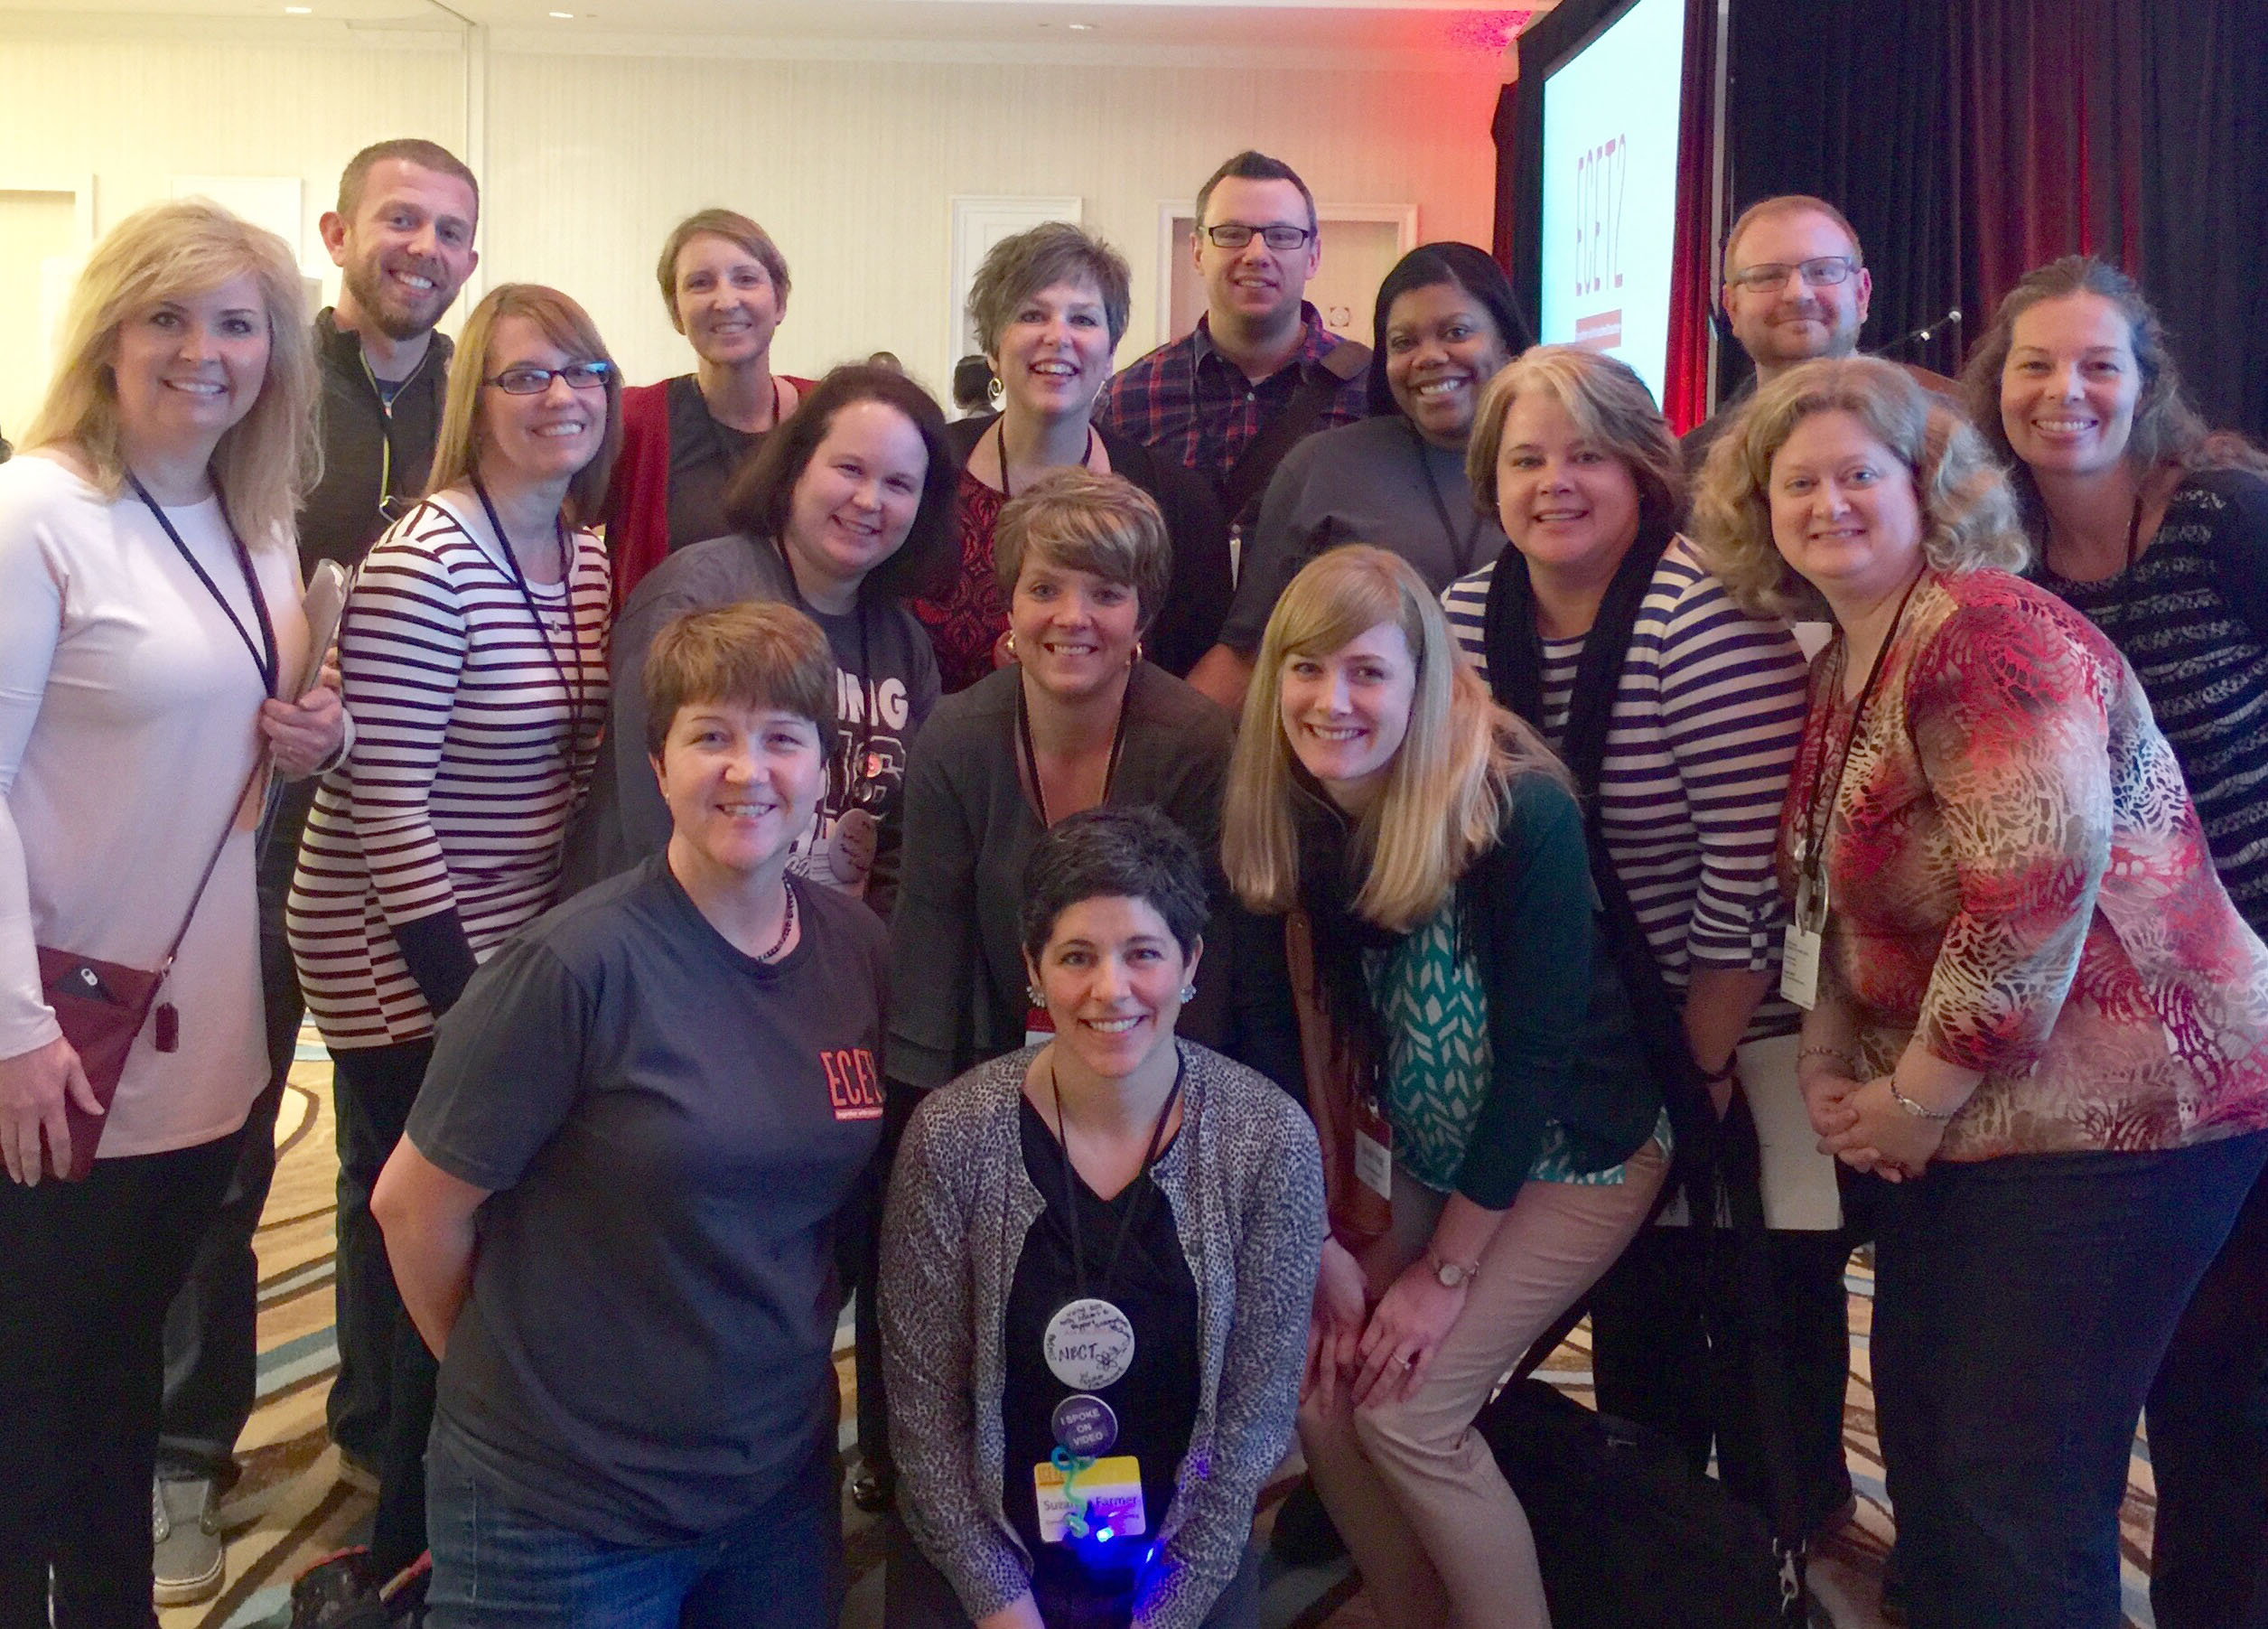 Teachers from across Kentucky recently attended the Elevating and Celebrating Effective Teaching and Teachers conference in San Diego. Attending the conference were, top row, from left, Eddie Mullins, Krystal Culp, Missy Callaway, Josh Rhodes, Natalie McCutchen, Dave Ruckdeschel, Erin Chavez; second row, from left, Amy Woolum, Derisa Hindle, Julia Bishop, Gail Jones, Sarah Yost, Ginger Estes, Jana Bryant; and front row, from left, Meme Ratliff and Suzanne Farmer. Photo submitted by Sarah Yost